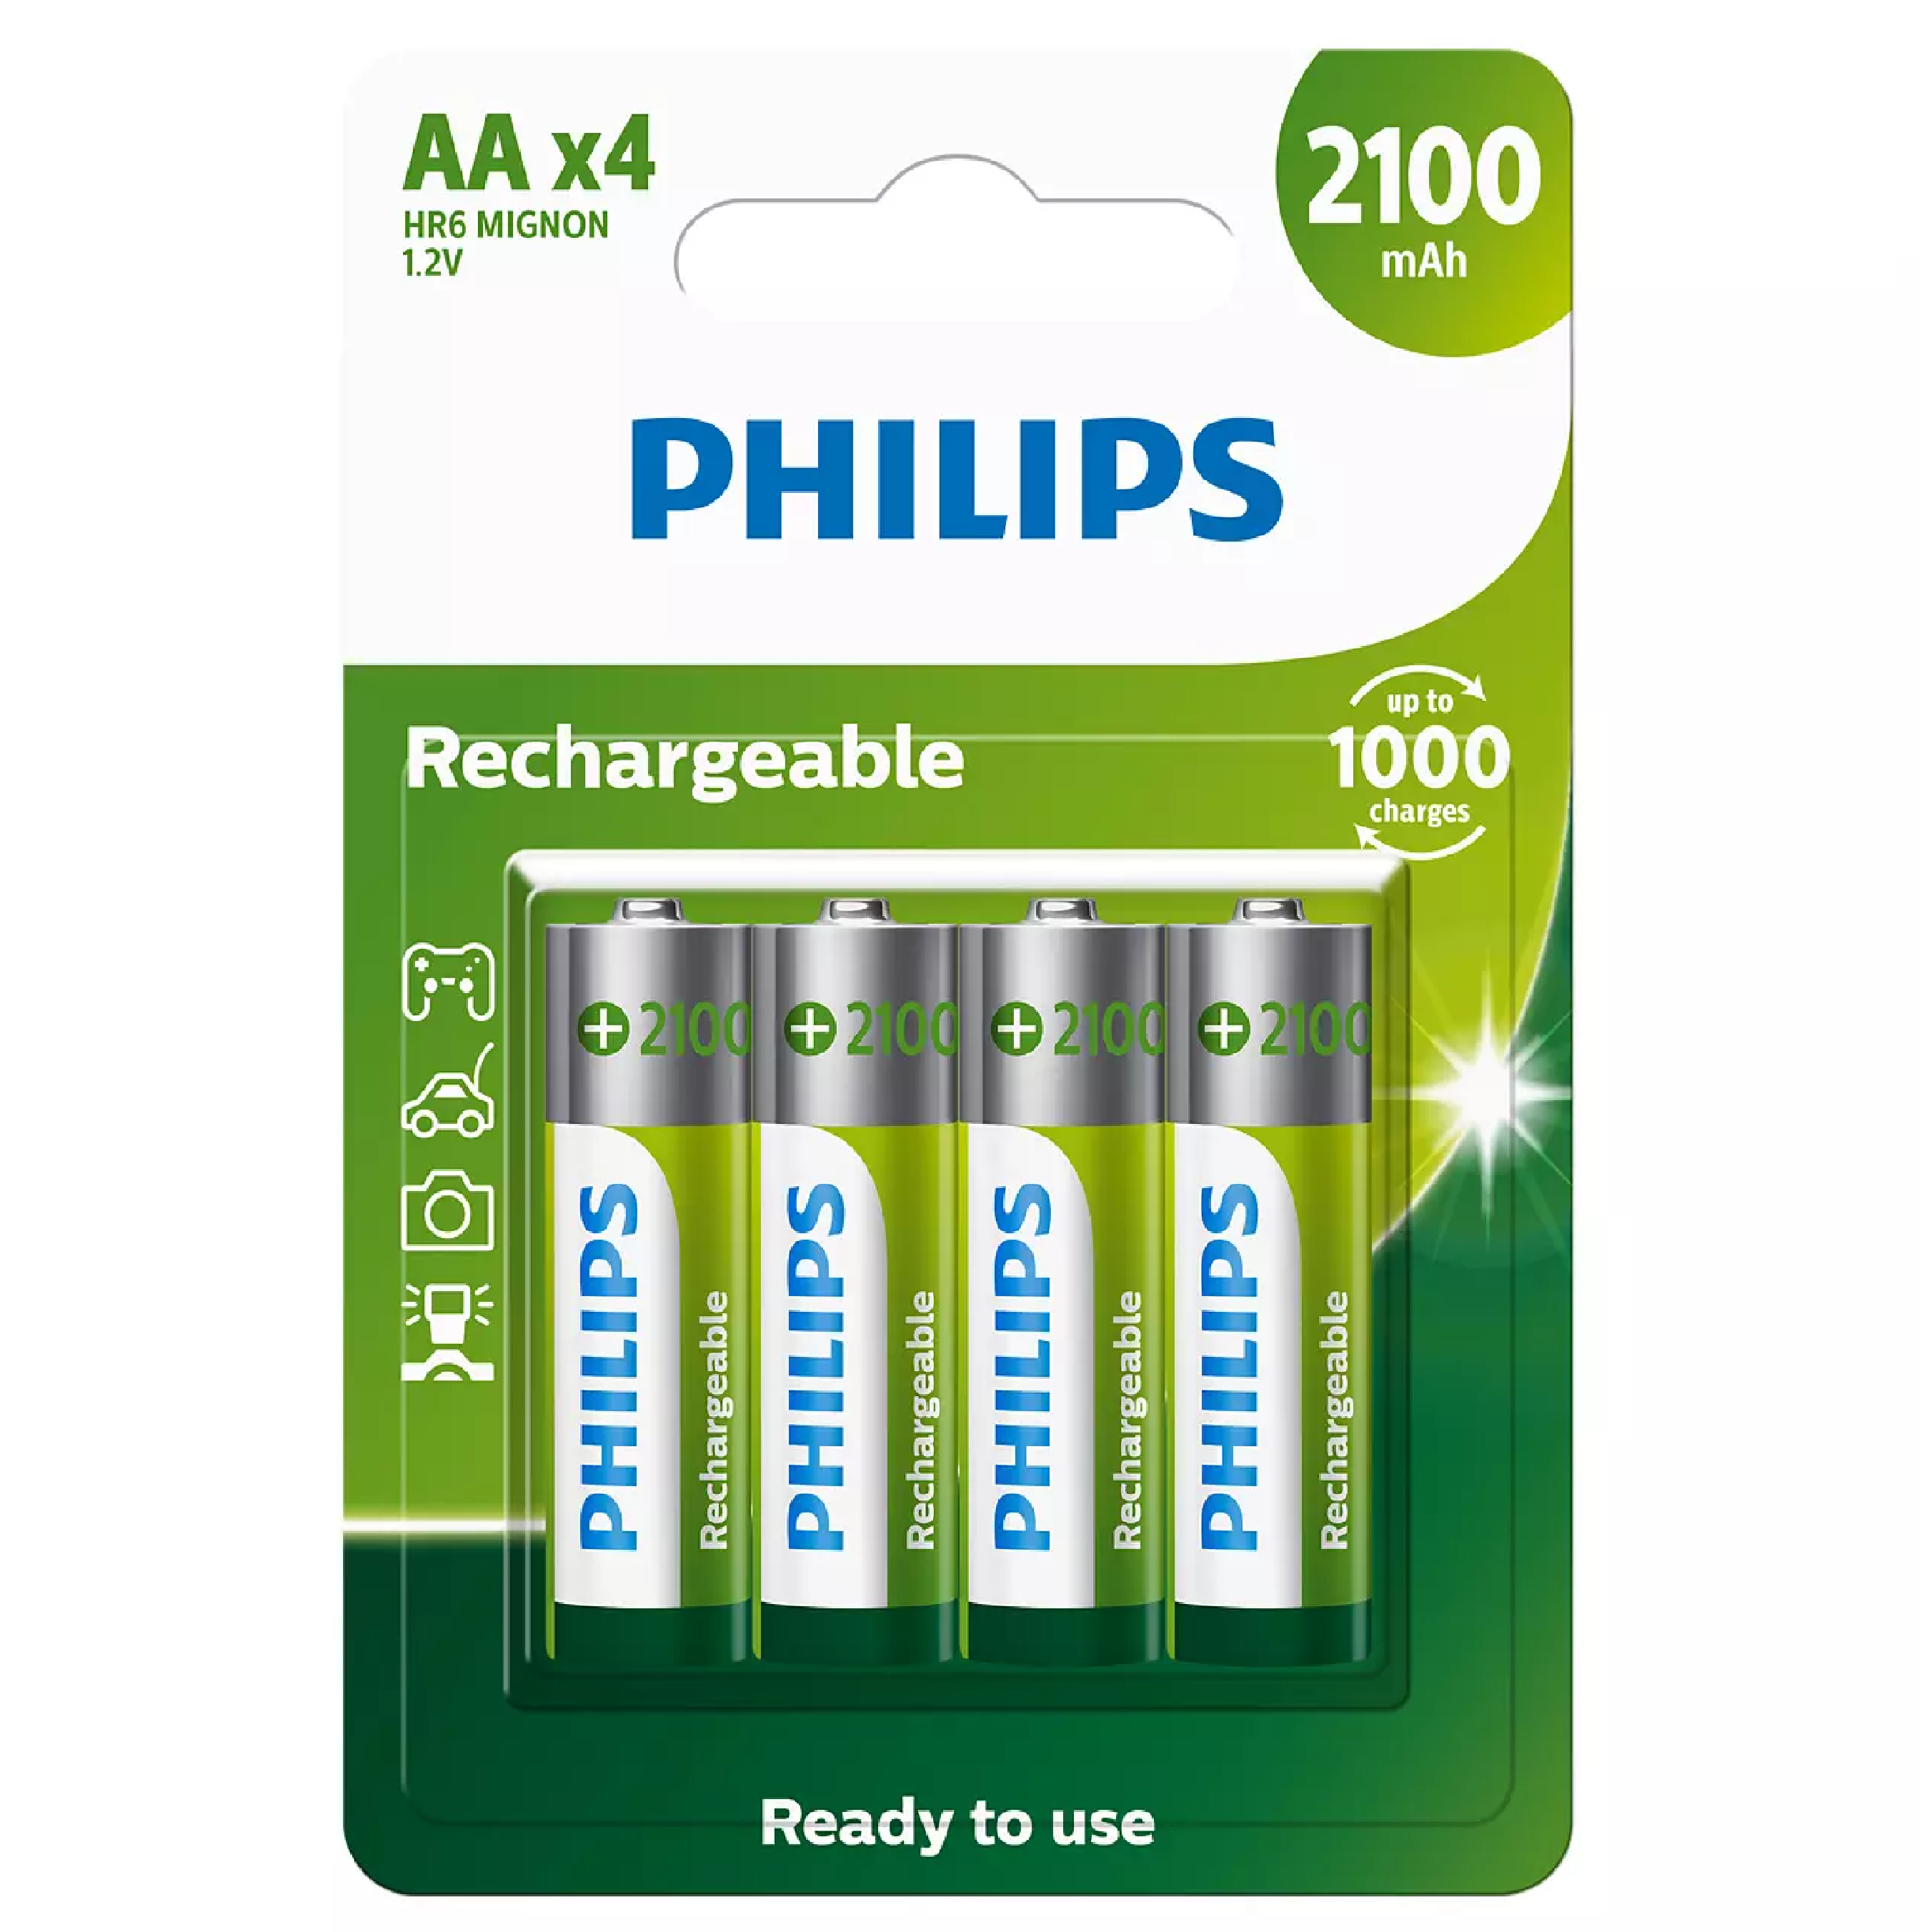 Philips 4AA 2100mAh Rechargeable Battery 4PC/PACK